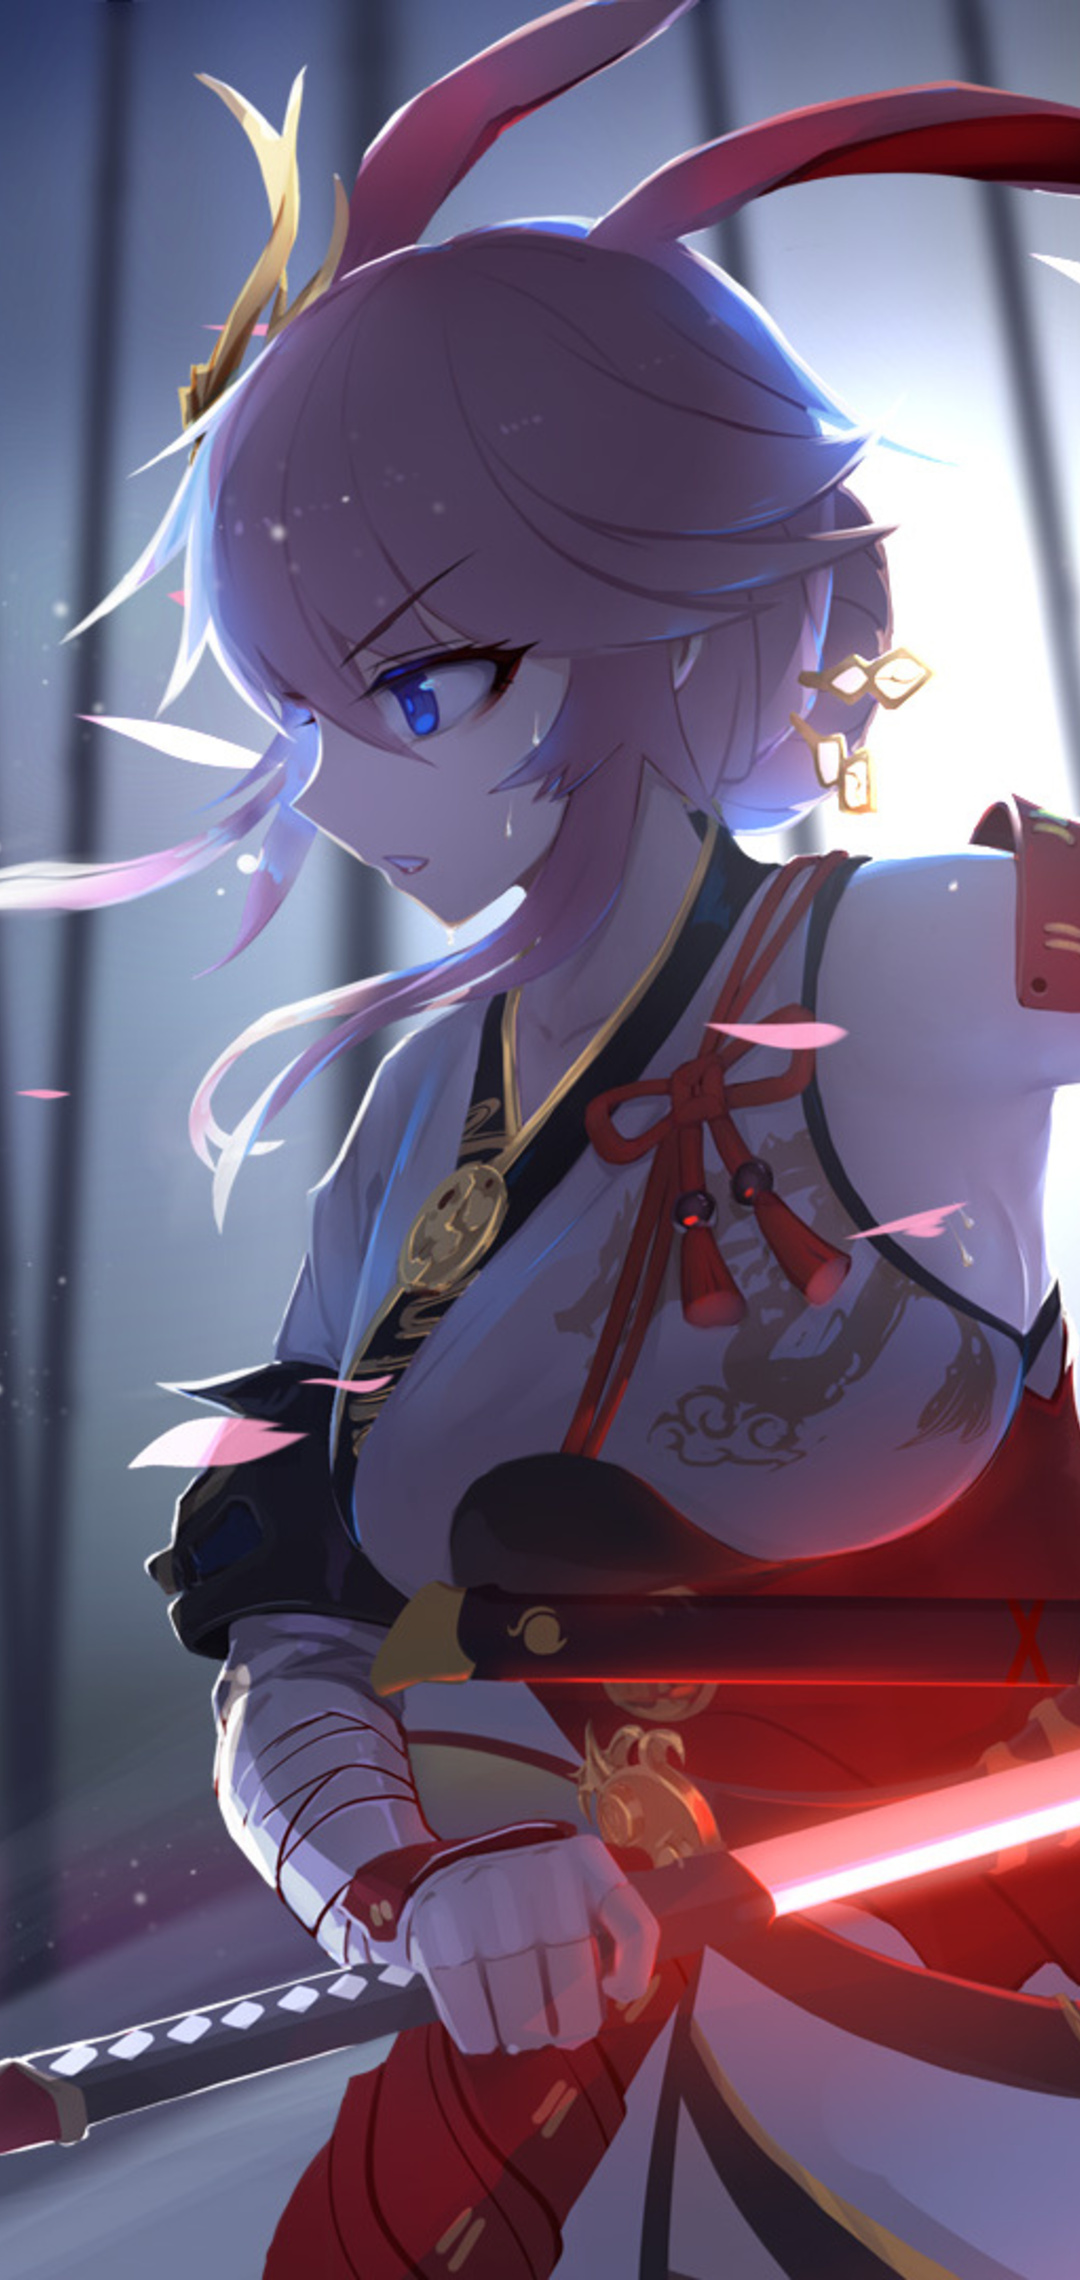 1080x2280 Honkai Impact Anime Girl One Plus 6,Huawei p20,Honor view 10,Vivo  y85,Oppo f7,Xiaomi Mi A2 HD 4k Wallpapers, Images, Backgrounds, Photos and  Pictures